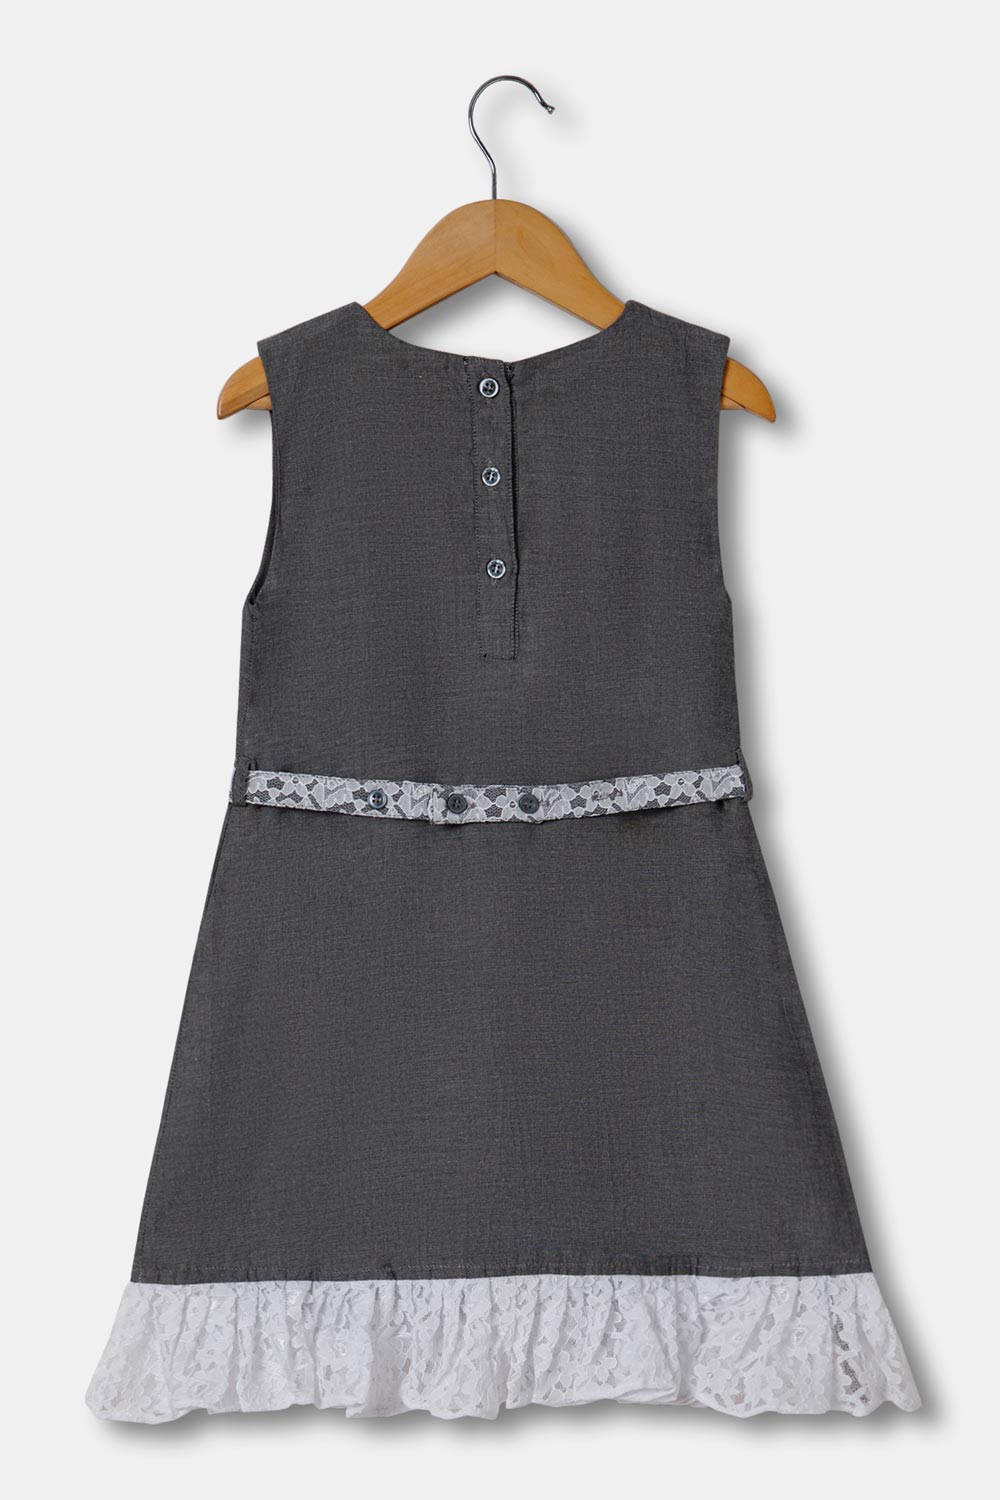 The Young Future Back Open  Girls Western Wear  - Dark Grey  - DR10